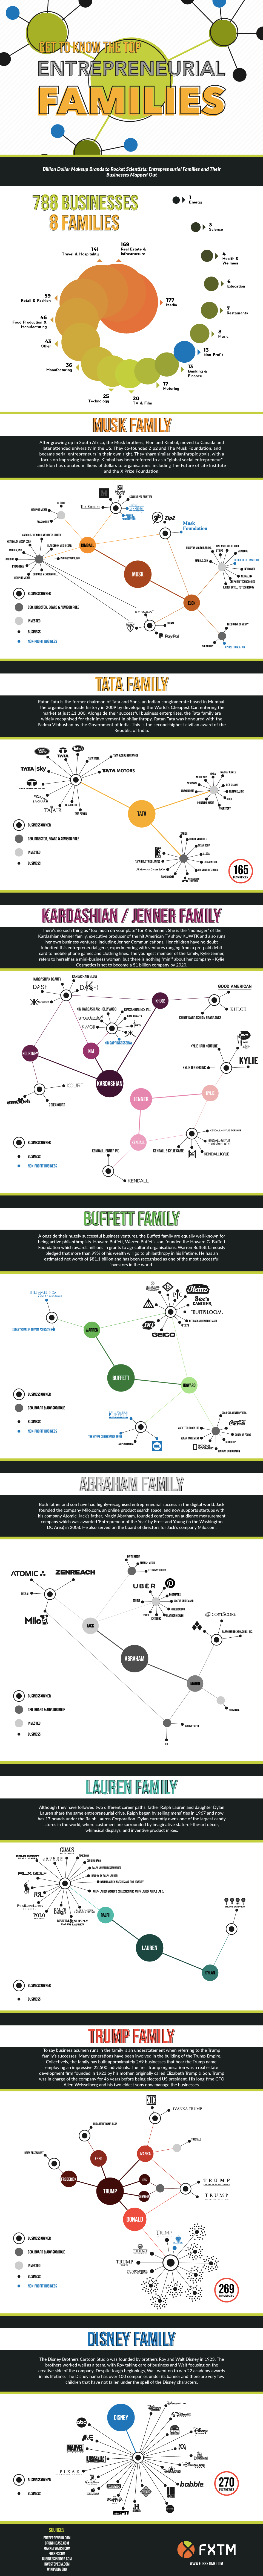 8 Begets 788: The Amazing Stories of Top Entrepreneurial Families - Infographic